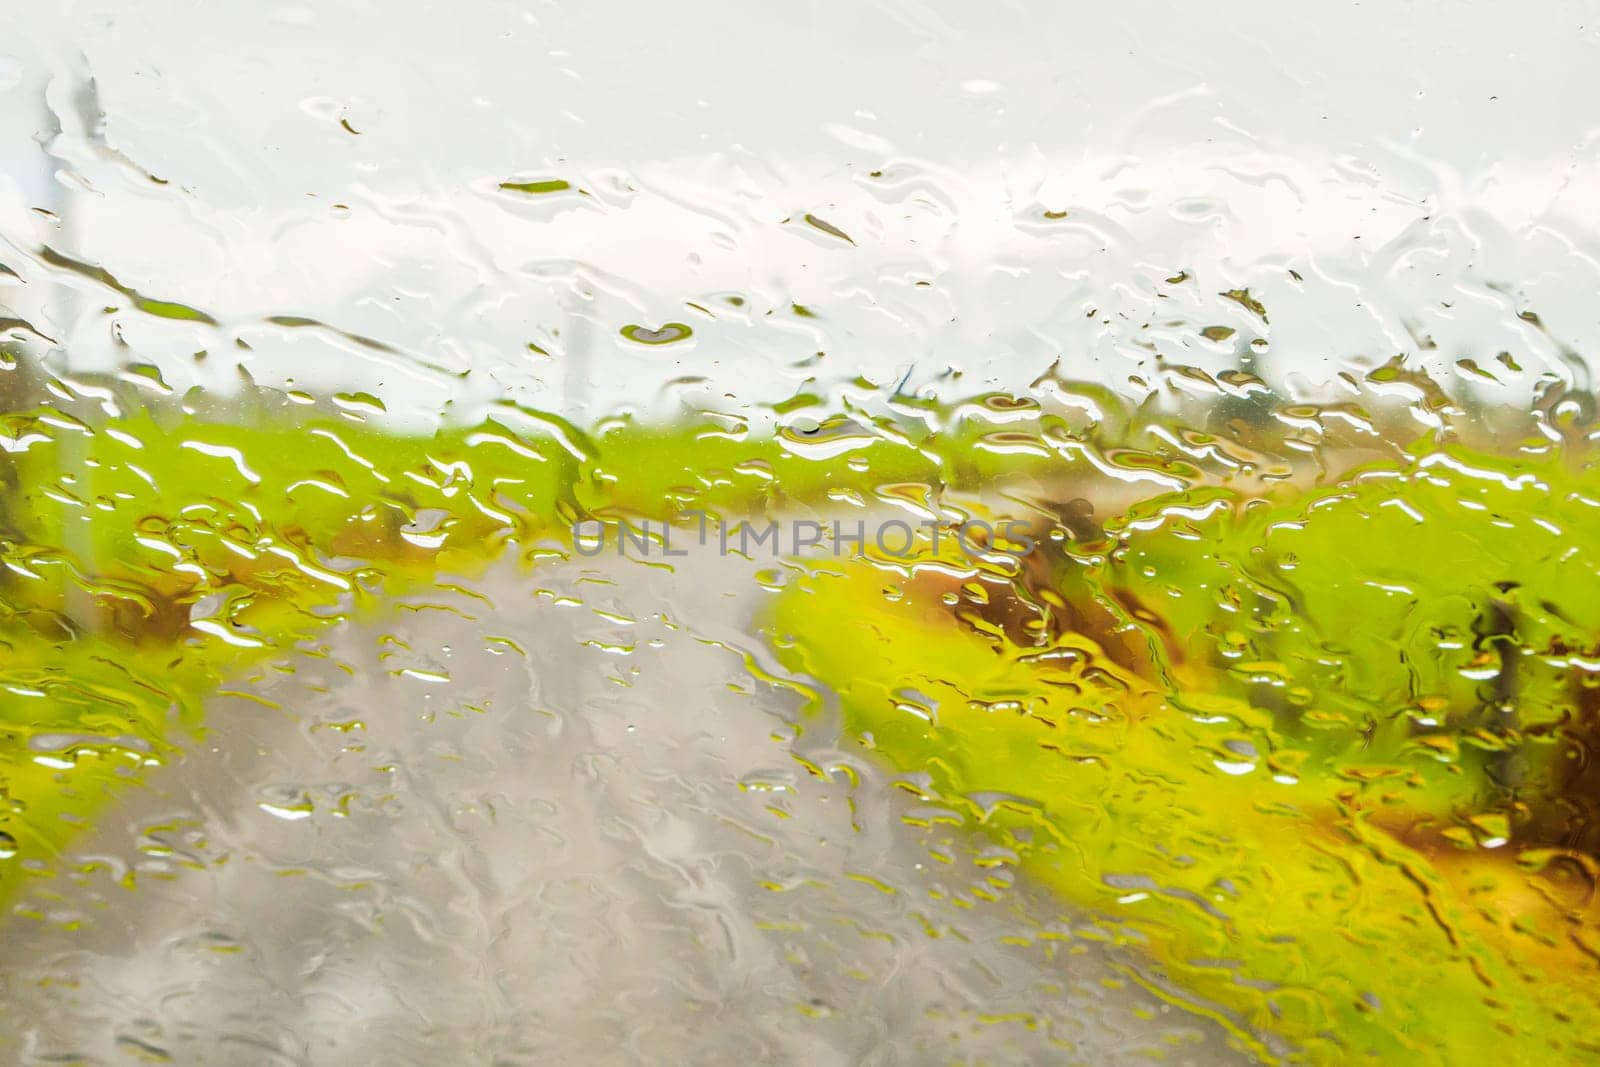 Abstract image of driving on a rural road, through the wet window